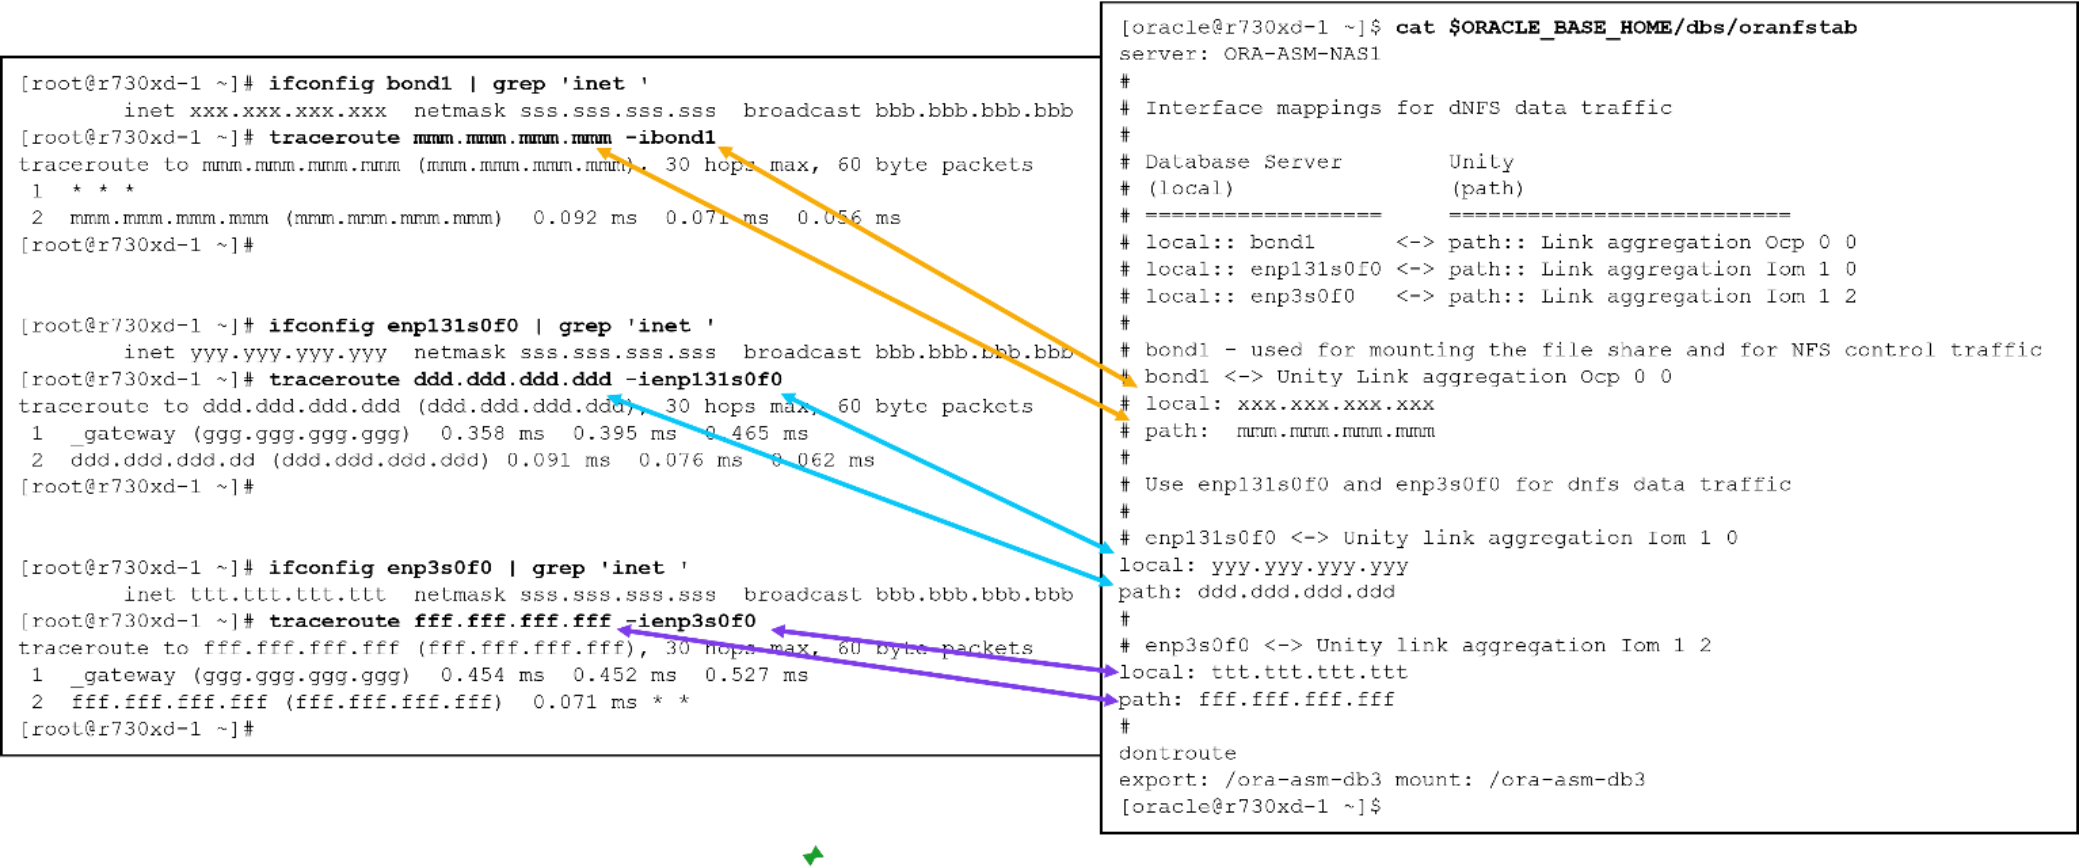 This diagram show the relationship between the dNFS paths defined in Oracle's oranfstab file and the Linux network configuration files and the static network routes.